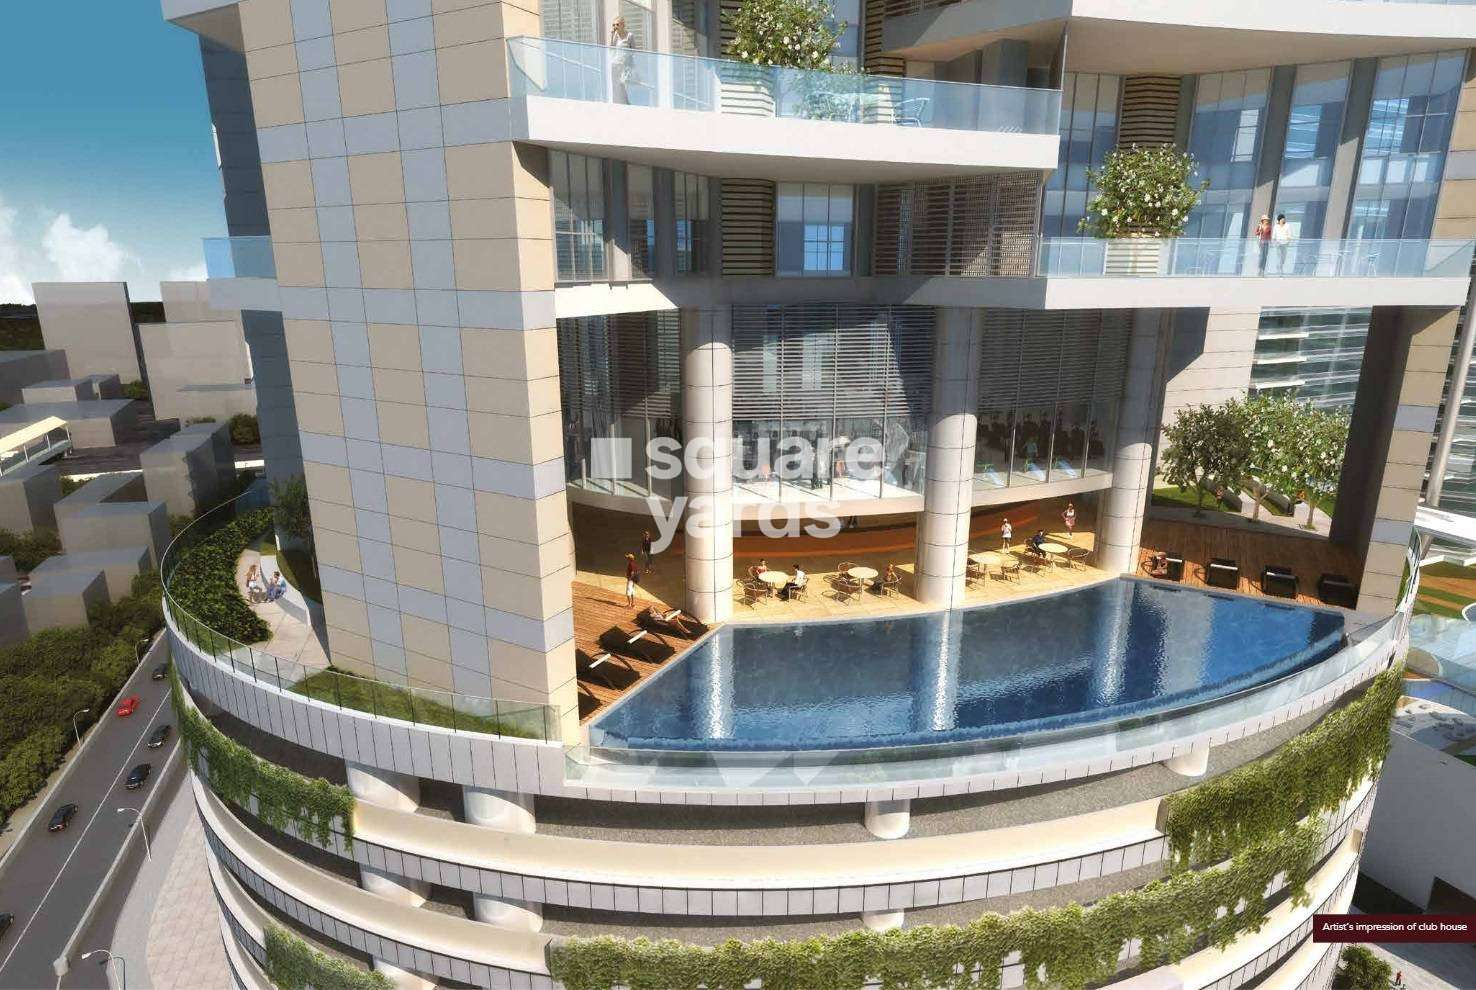 indiabulls sky project amenities features5